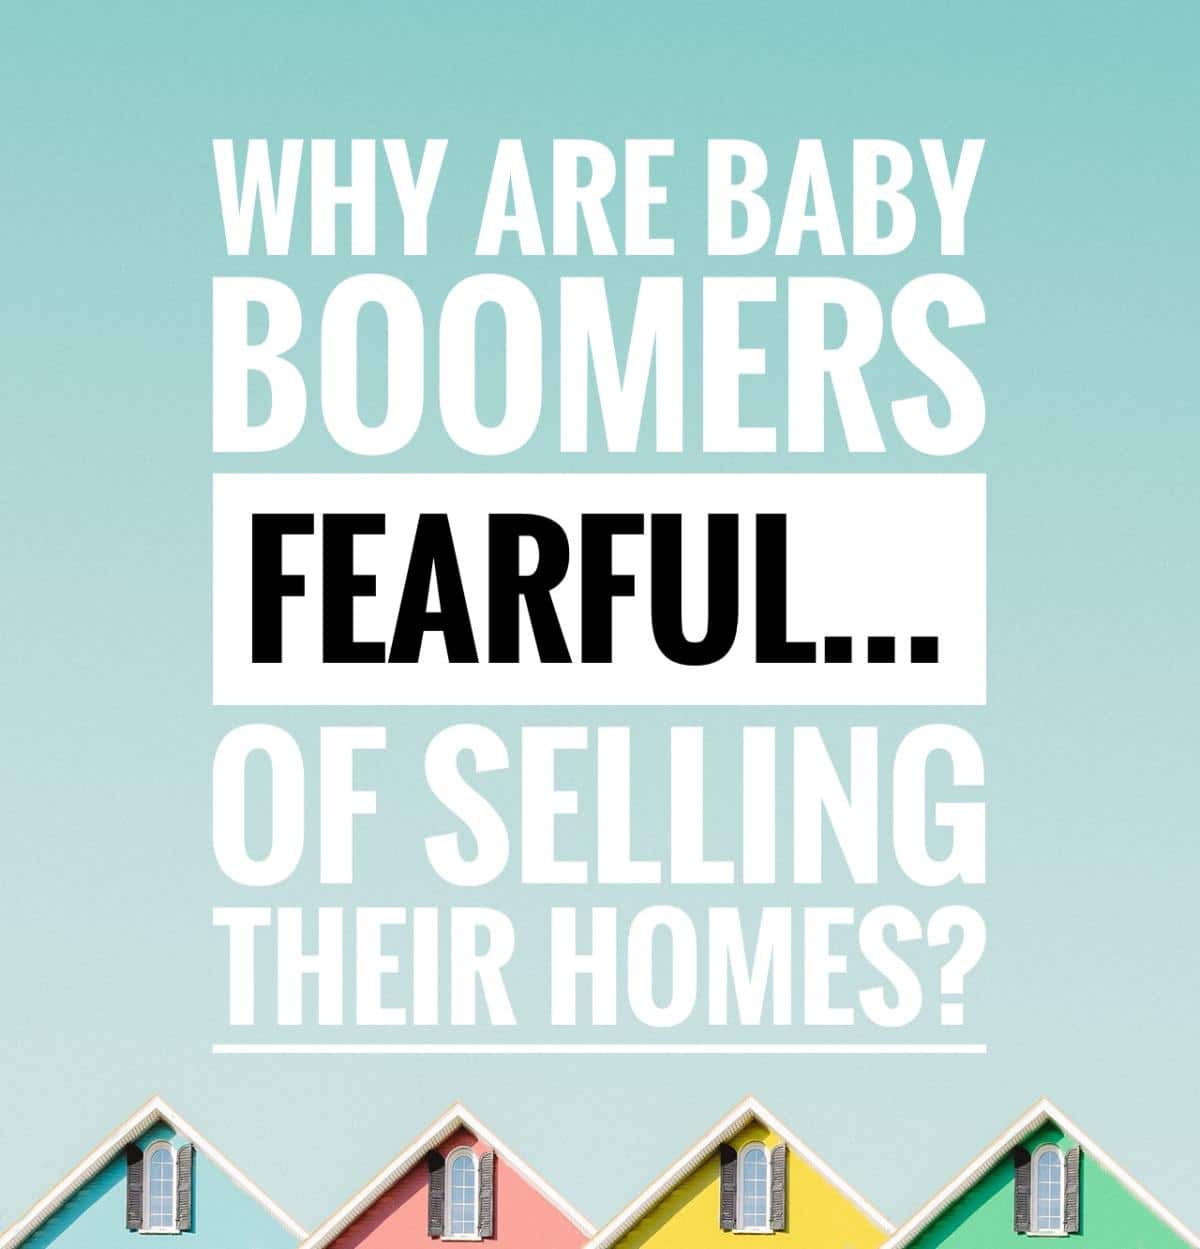 Why are Baby Boomers Fearful… of Selling Their Homes?